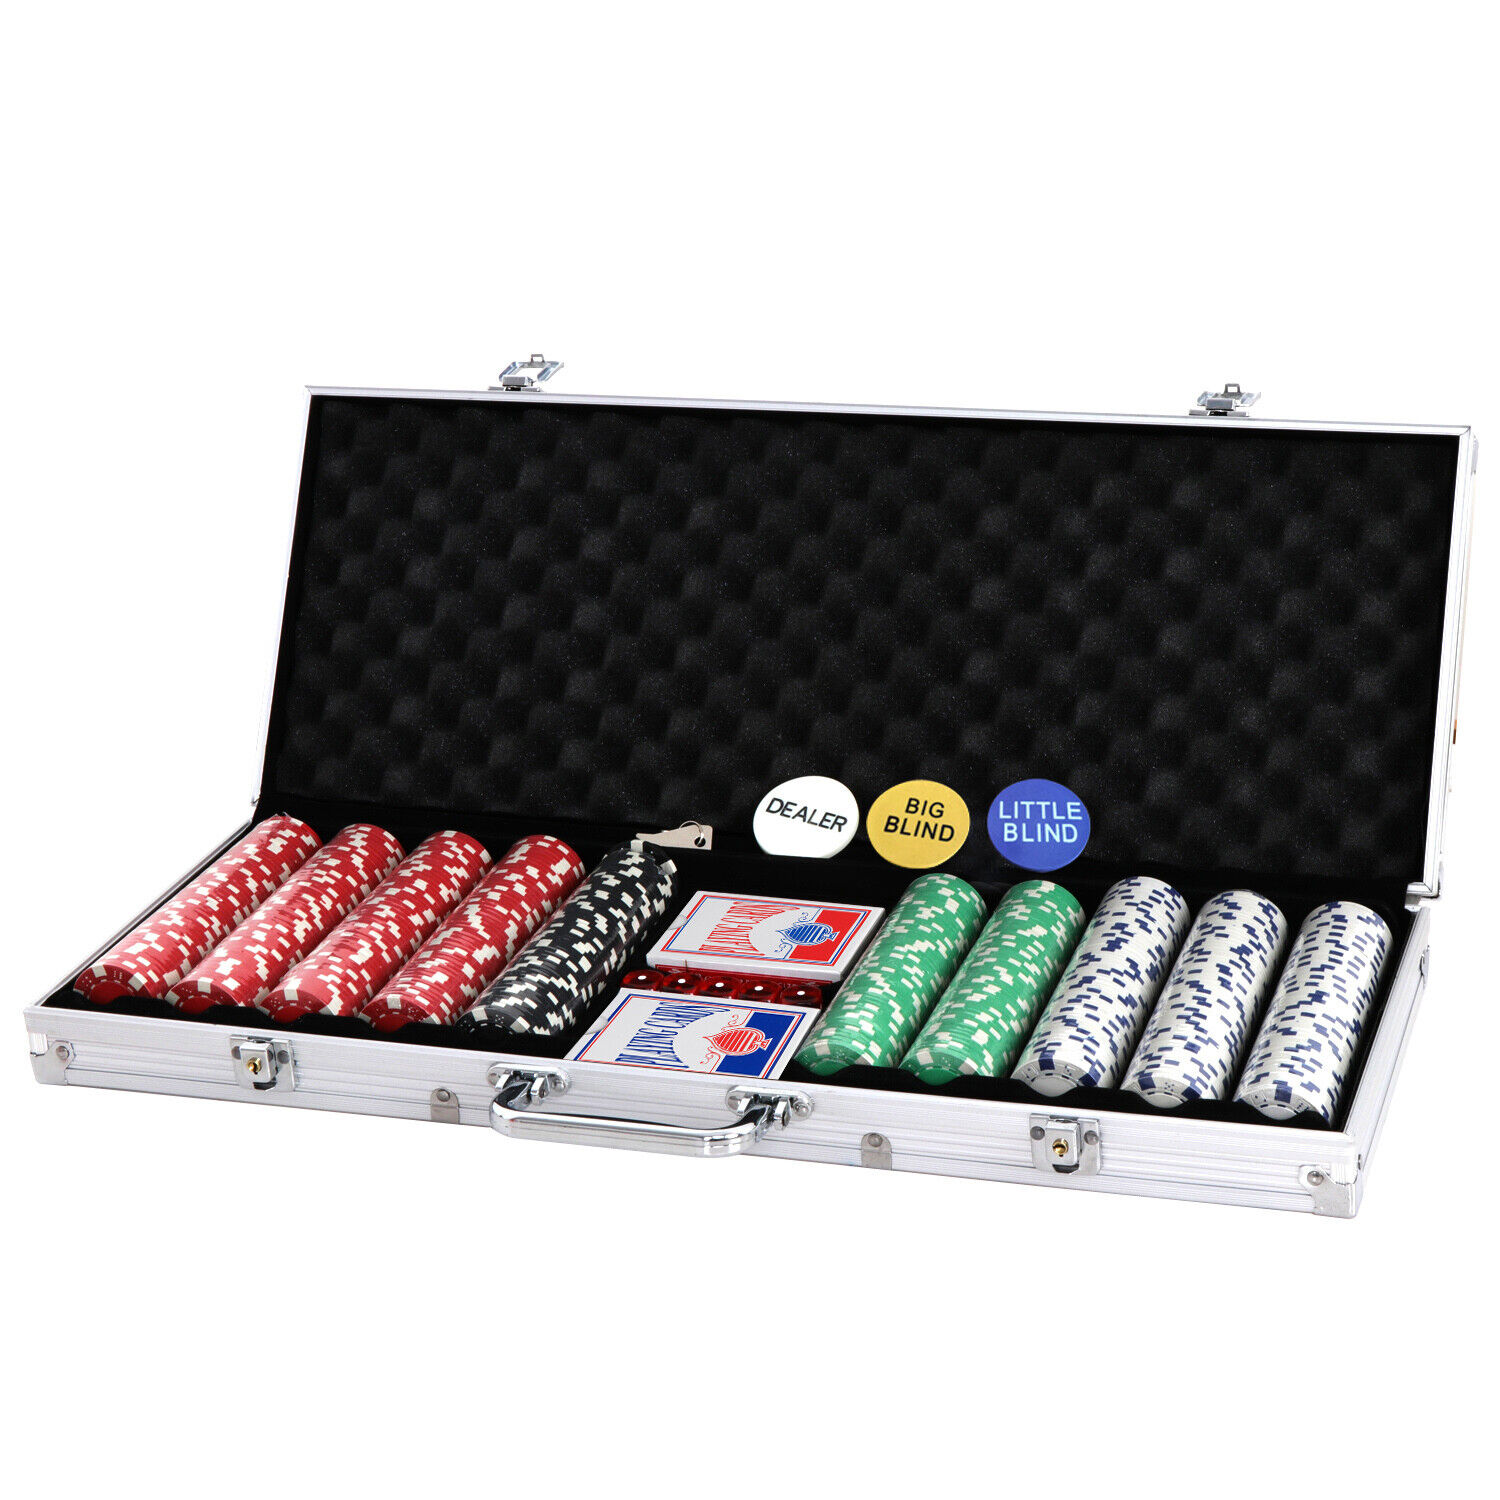 500 Chips Poker Chips Set 11.5 Gram Holdem Cards Game with Case & Dices at Home